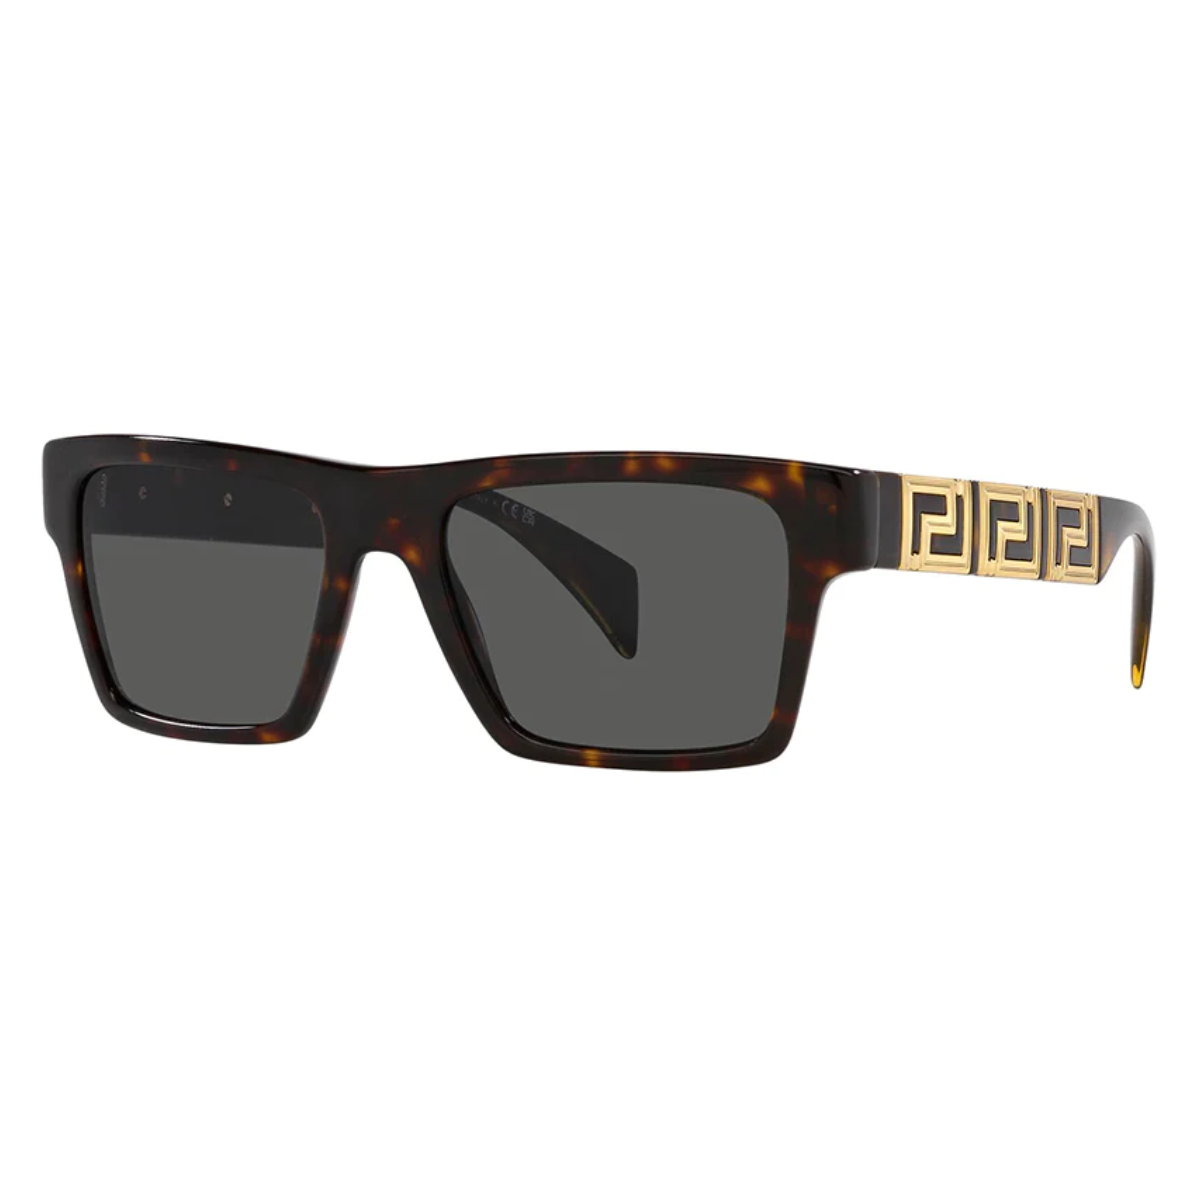 "Versace 4445 108/87 54 Sunglass: Elevate your style with luxury sunglasses for men at Optorium. Shop now for trendy and stylish eyewear."